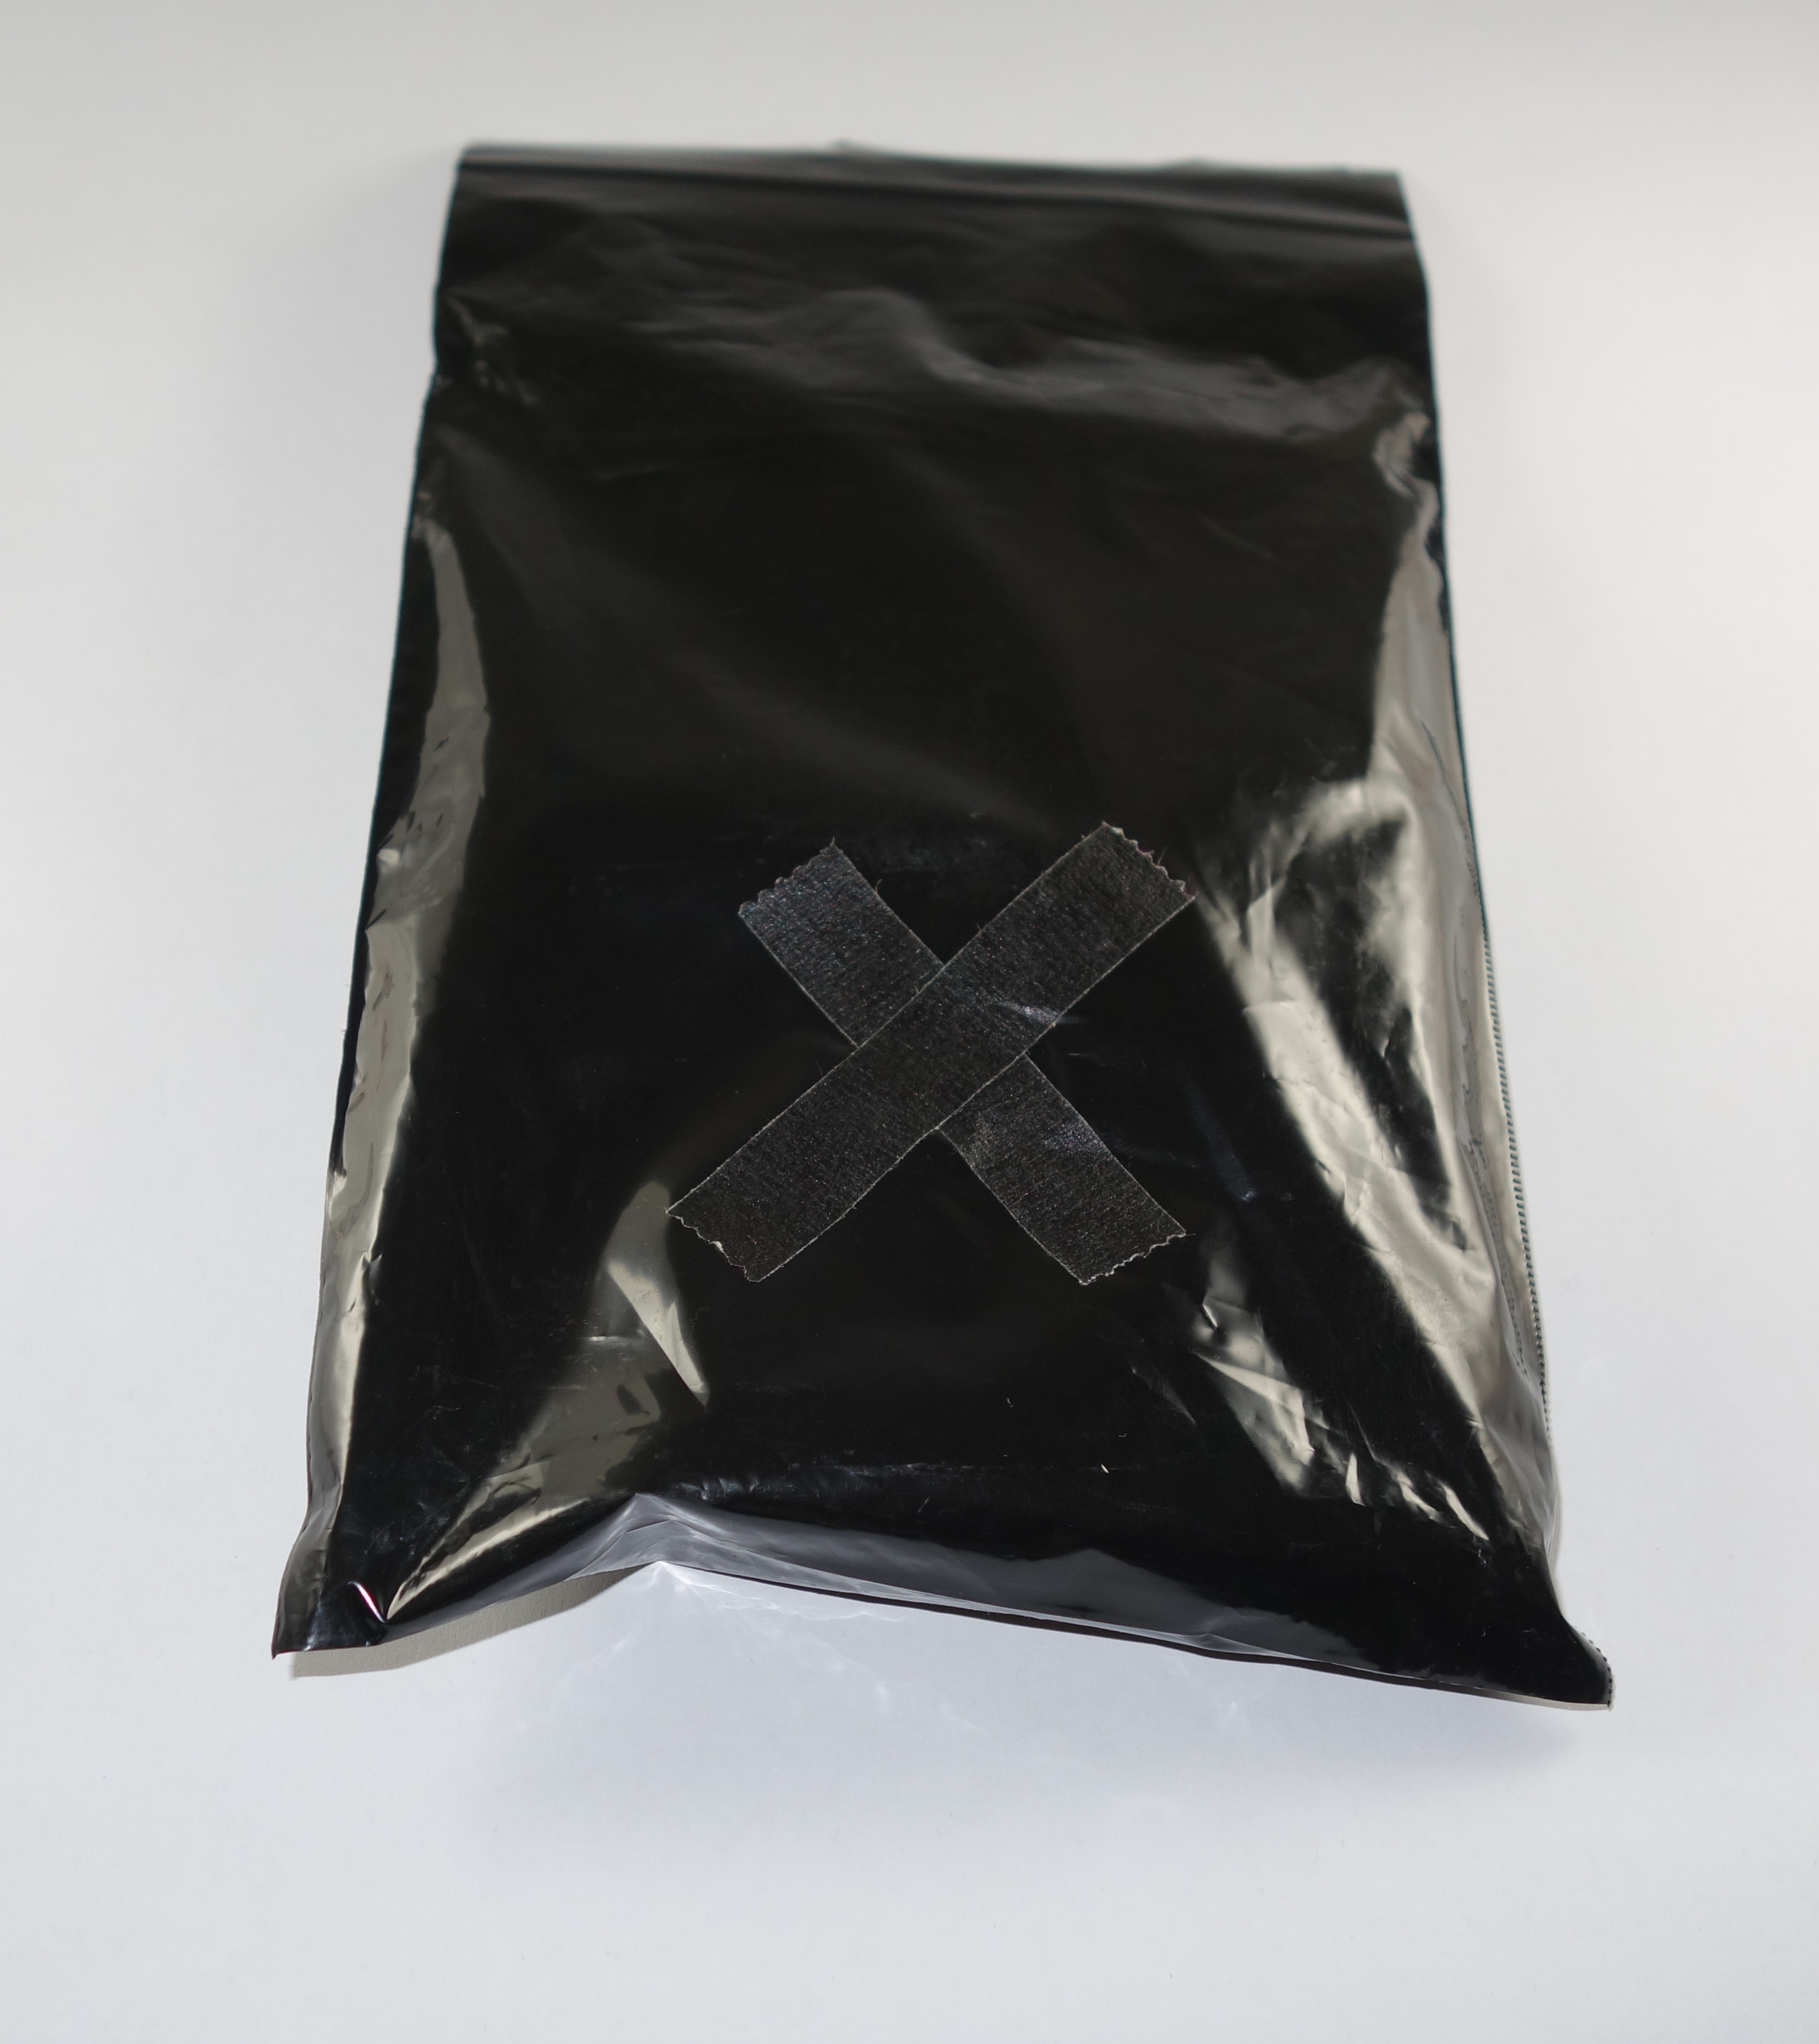 The Tar Field Notes arrive in a black bag  with a tape "X"